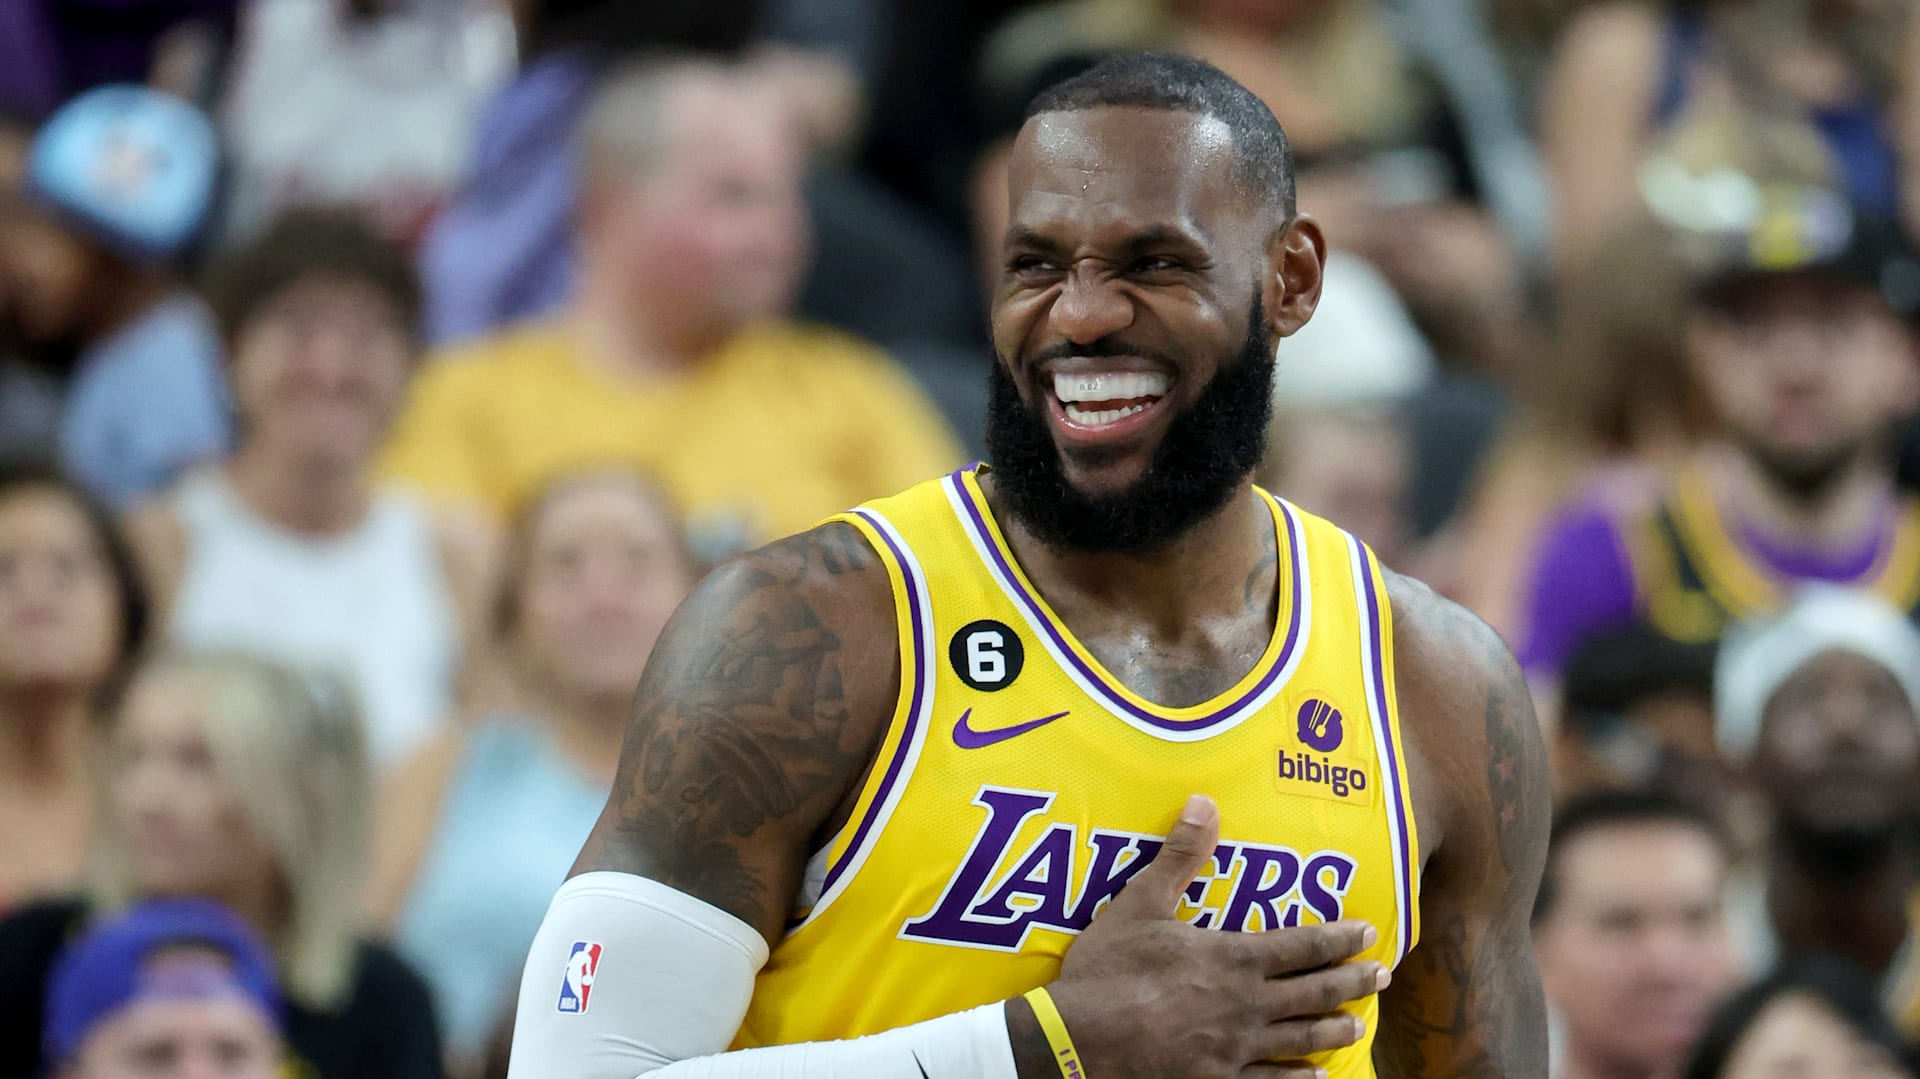 LeBron James edges closer to NBA scoring record and shares advice